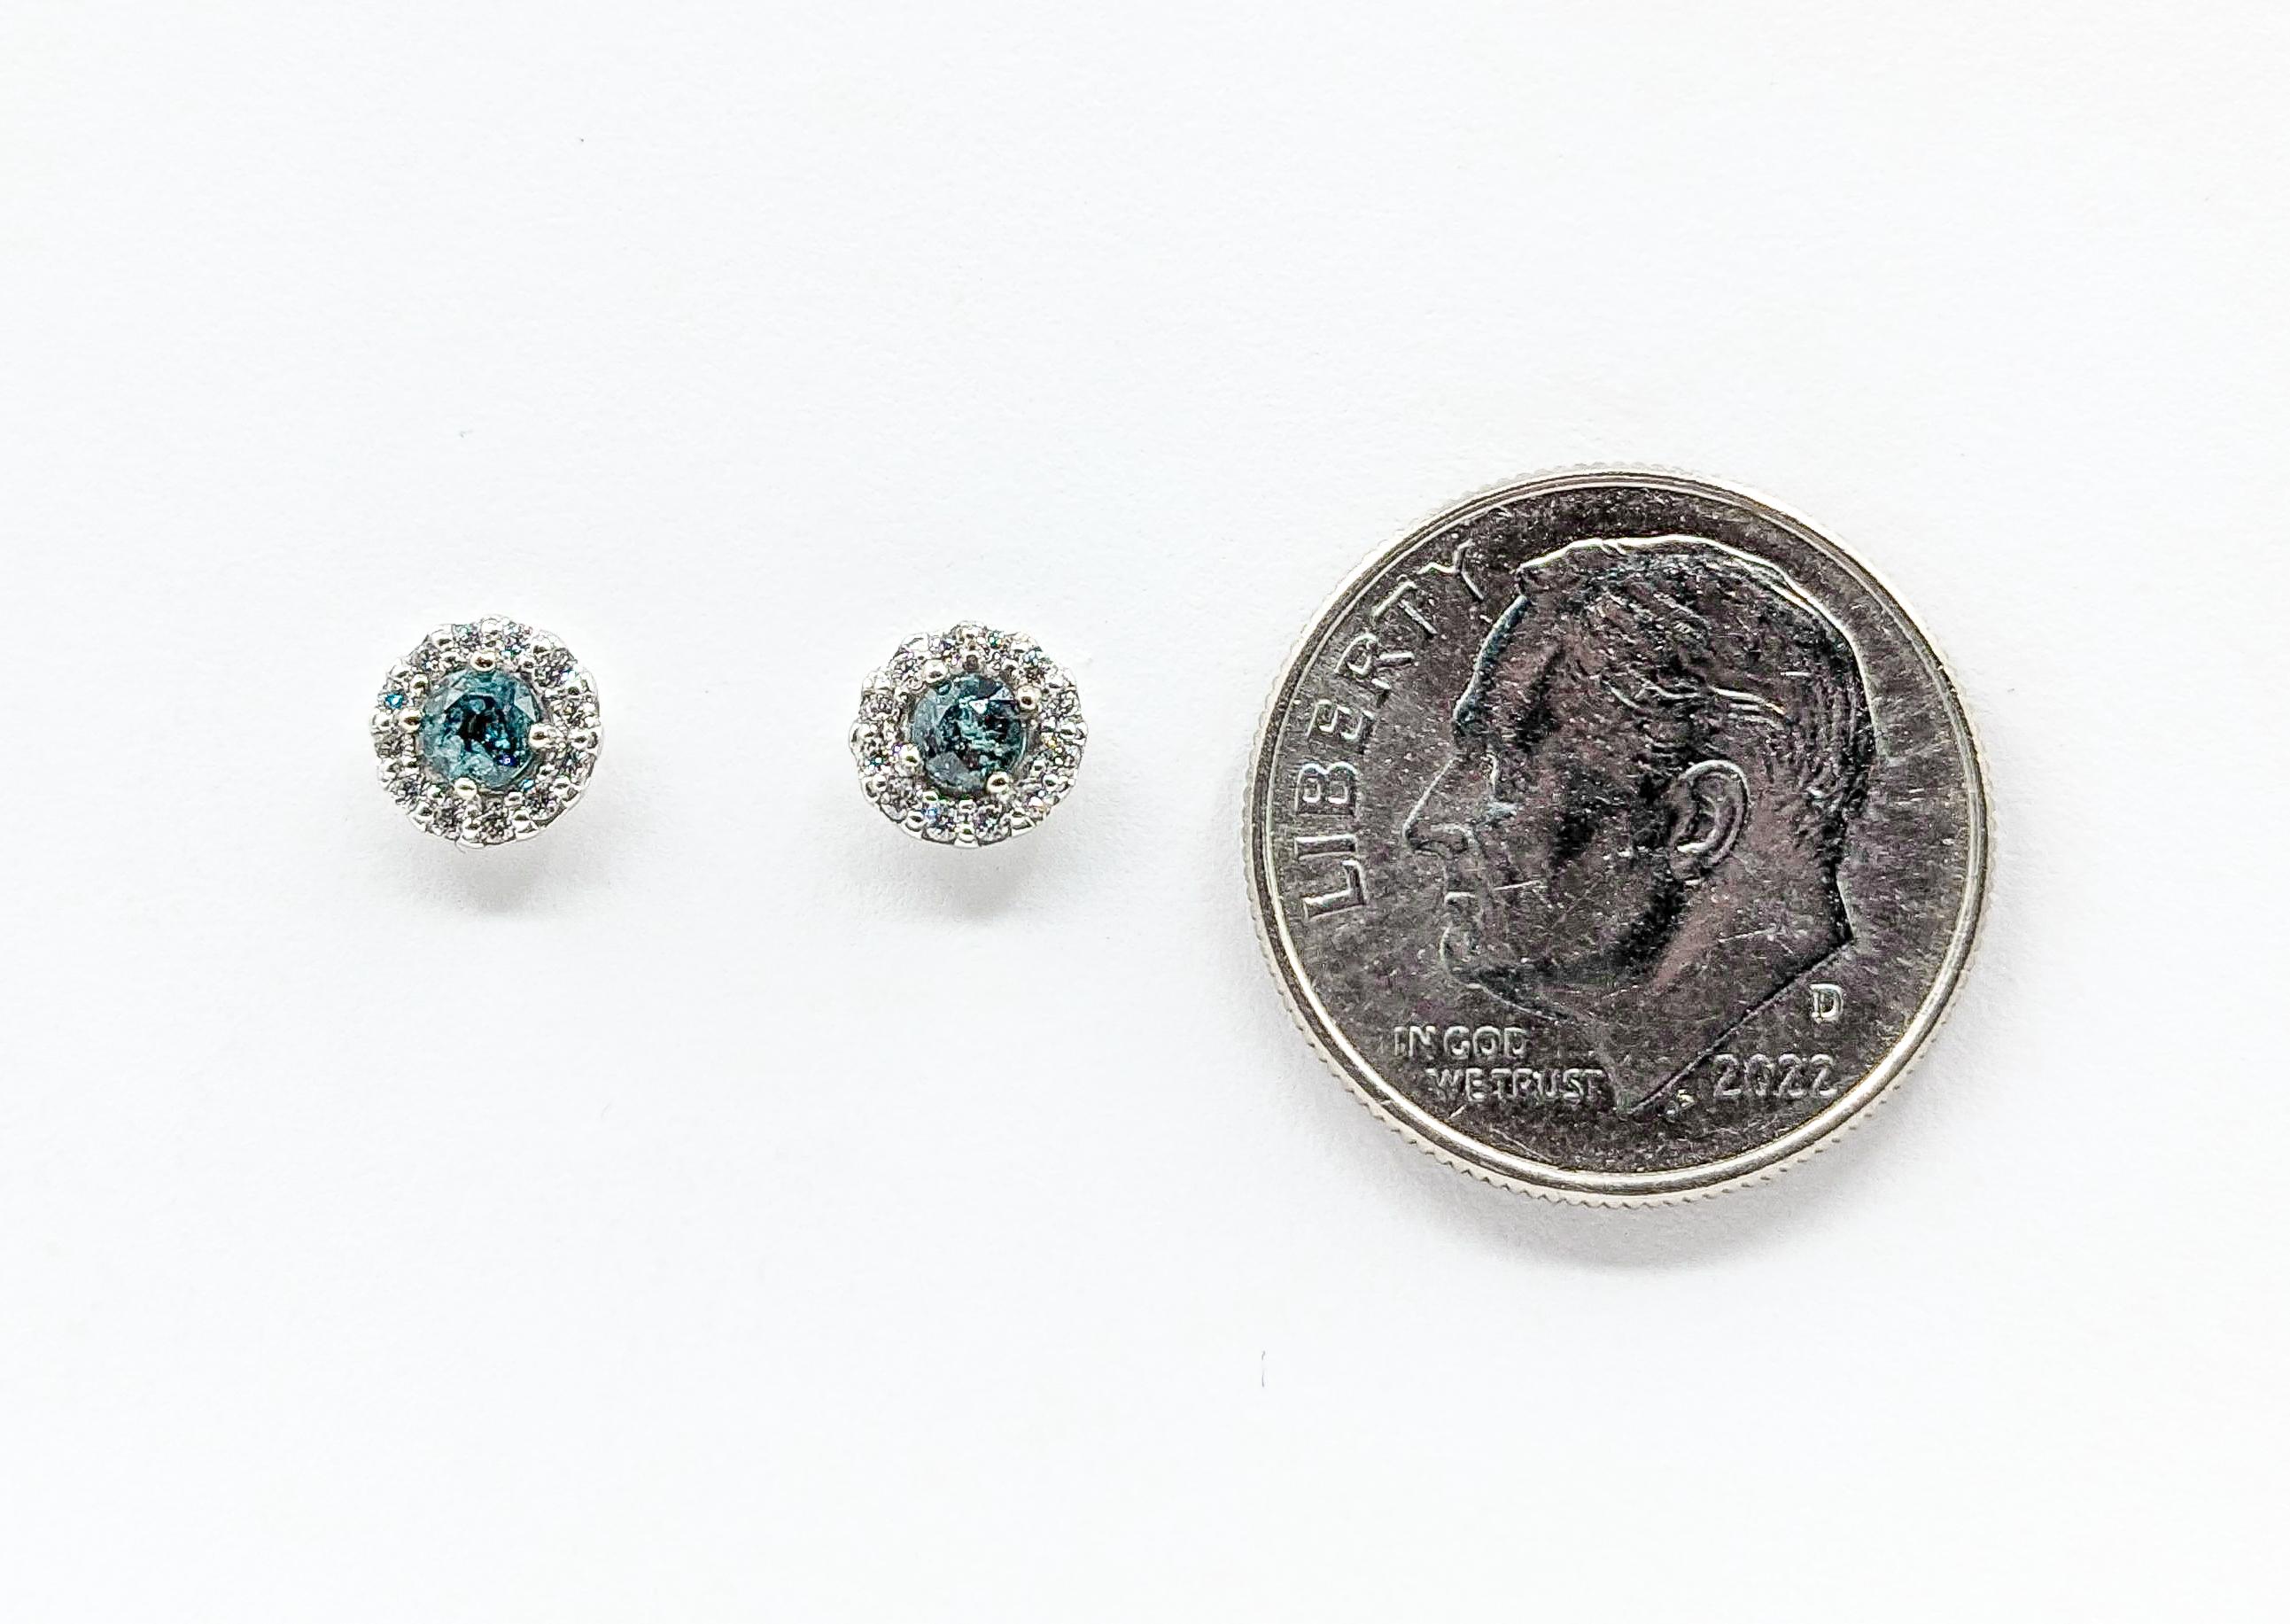 Natural Brazilian Alexandrite & Diamond Halo Stud Earrings in White Gold

Introducing these beautiful alexandrite earrings crafted in 14kw White Gold. These earrings showcase a 0.23ctw of Natural Brazilian Color Change Alexandrite. The alexandrite